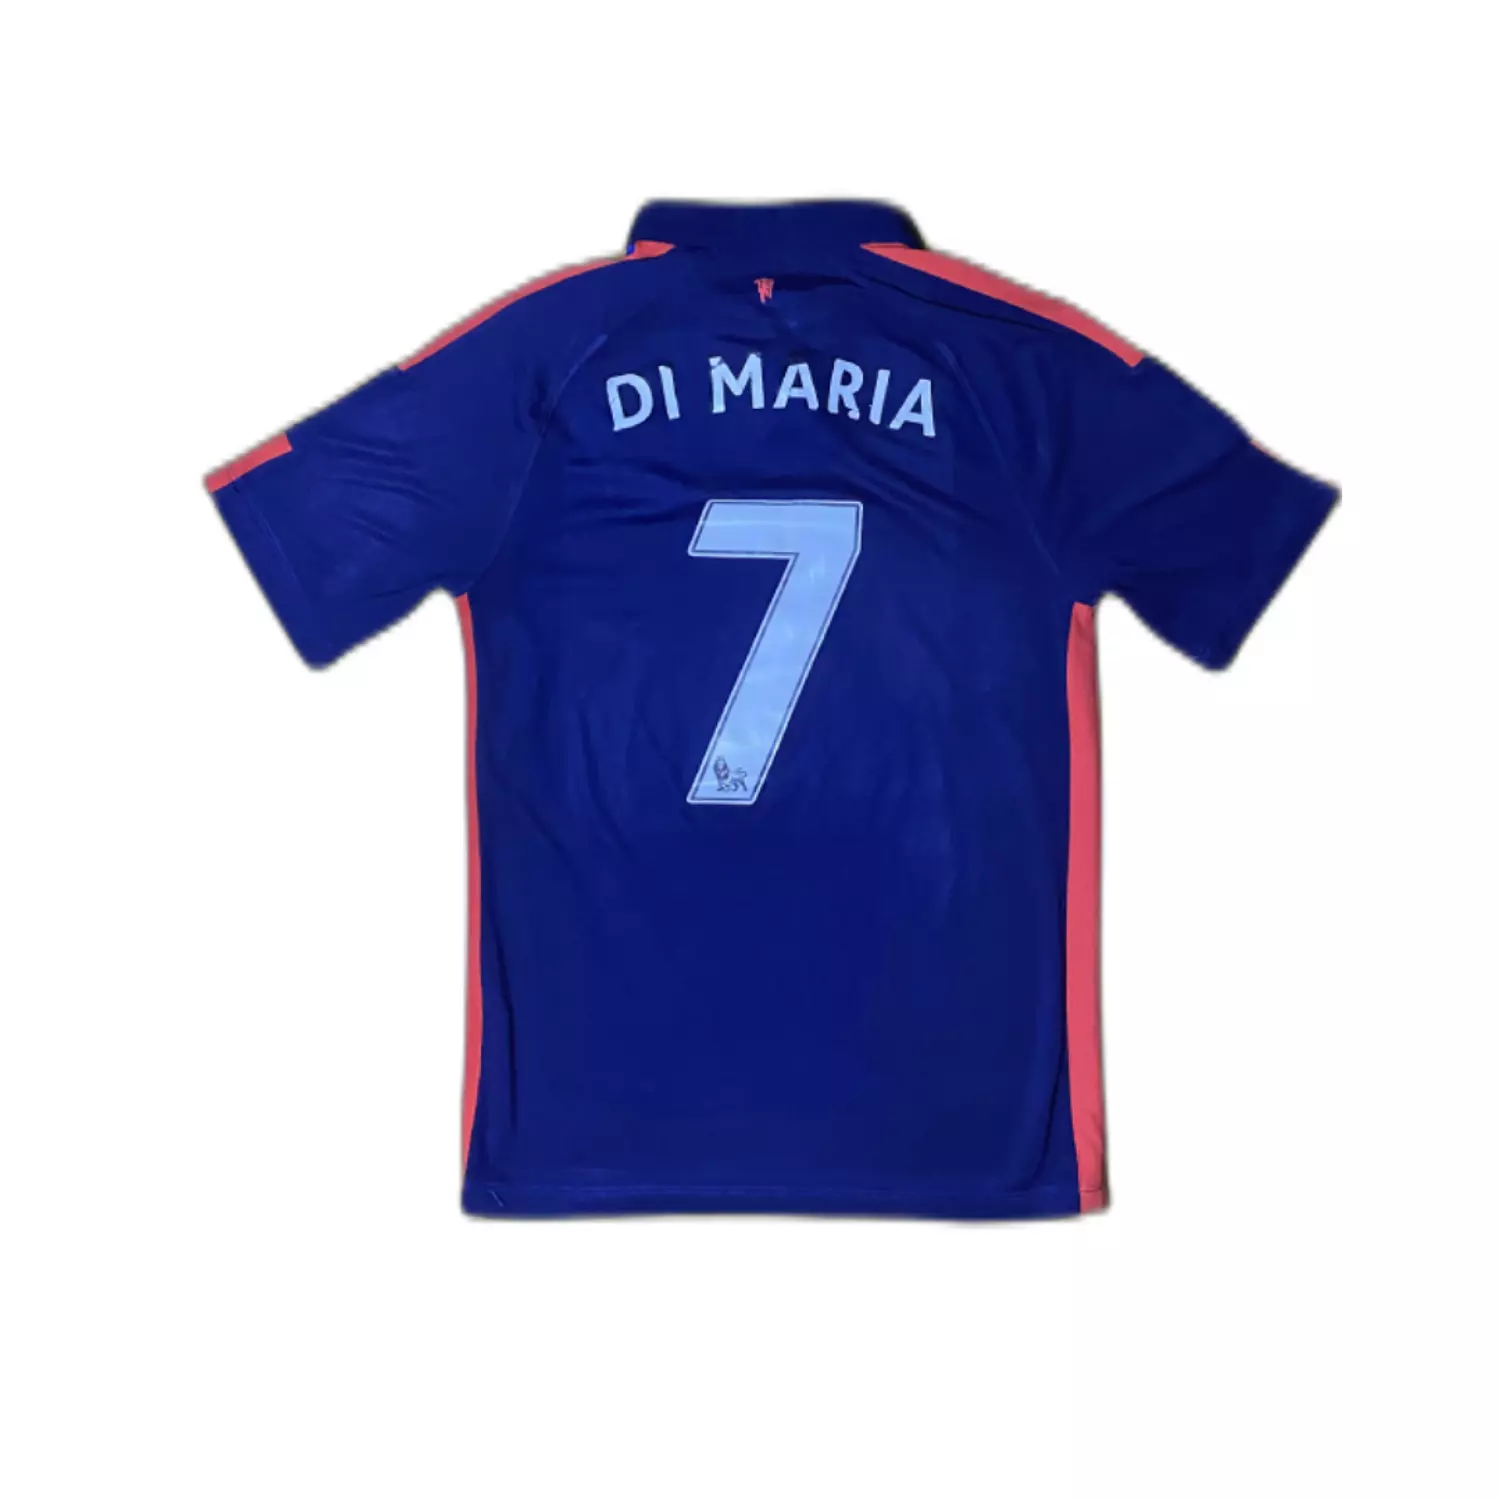 Manchester United 2013/14 Away Kit (S) Di Maria #7 1